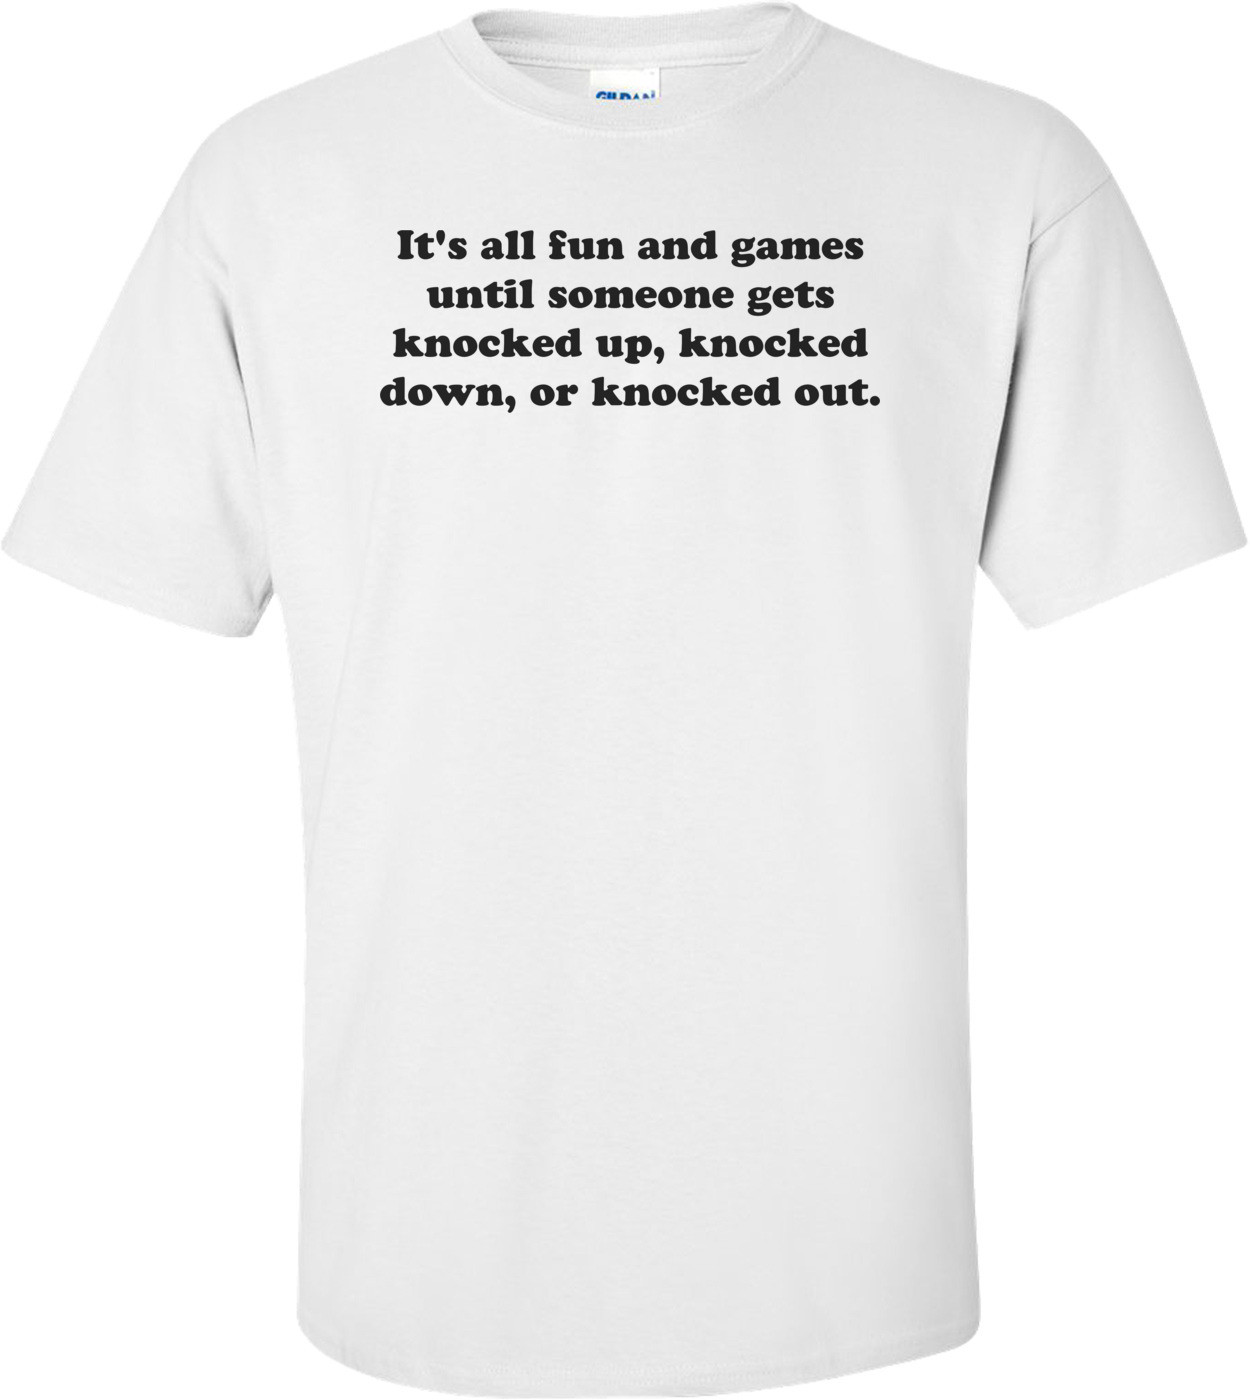 It's all fun and games until someone gets knocked up, knocked down, or knocked out. Shirt